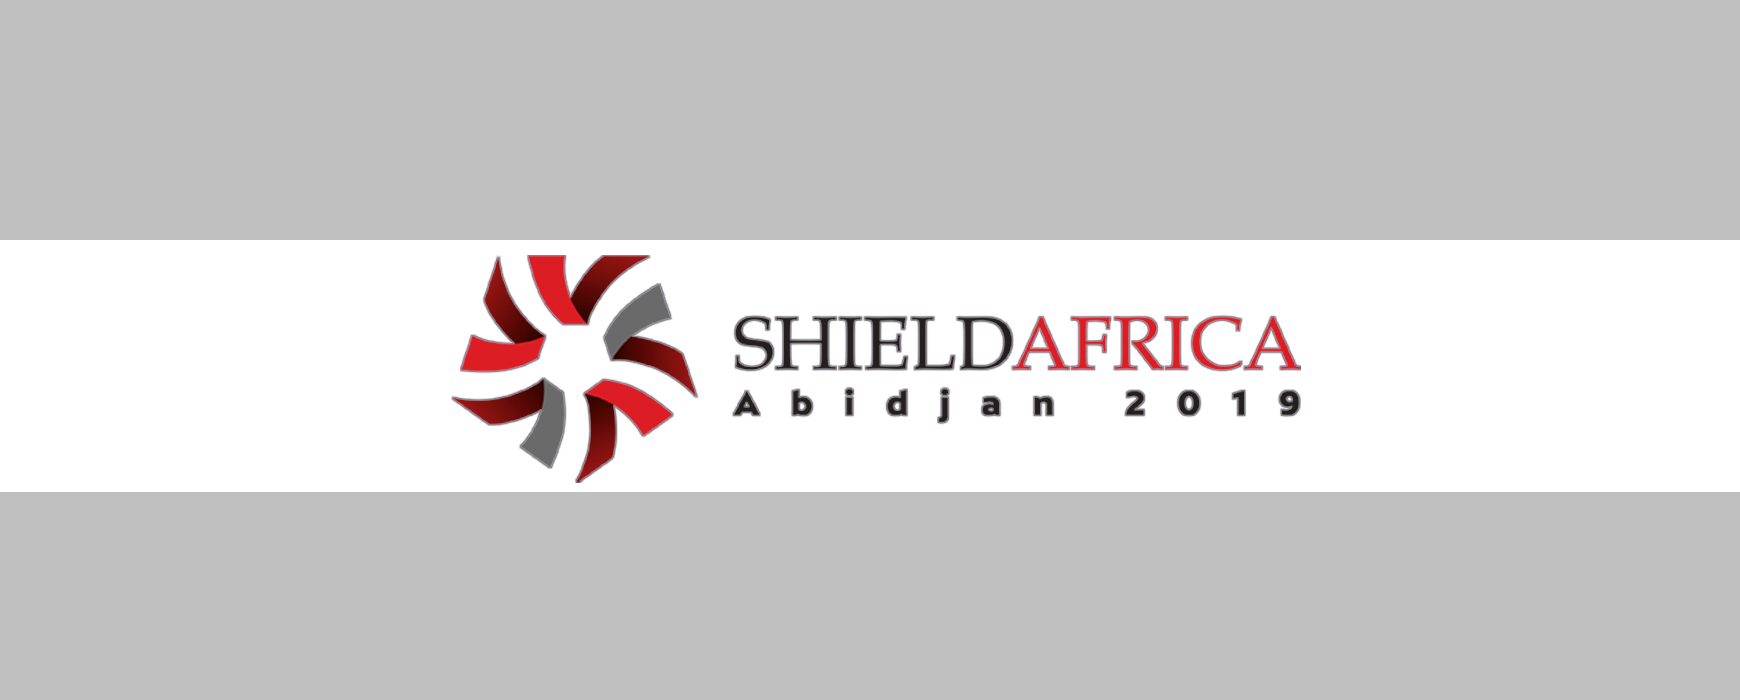 DEFENSE/ SECURITY: IGN FI to be present at Shield Africa Exhibition